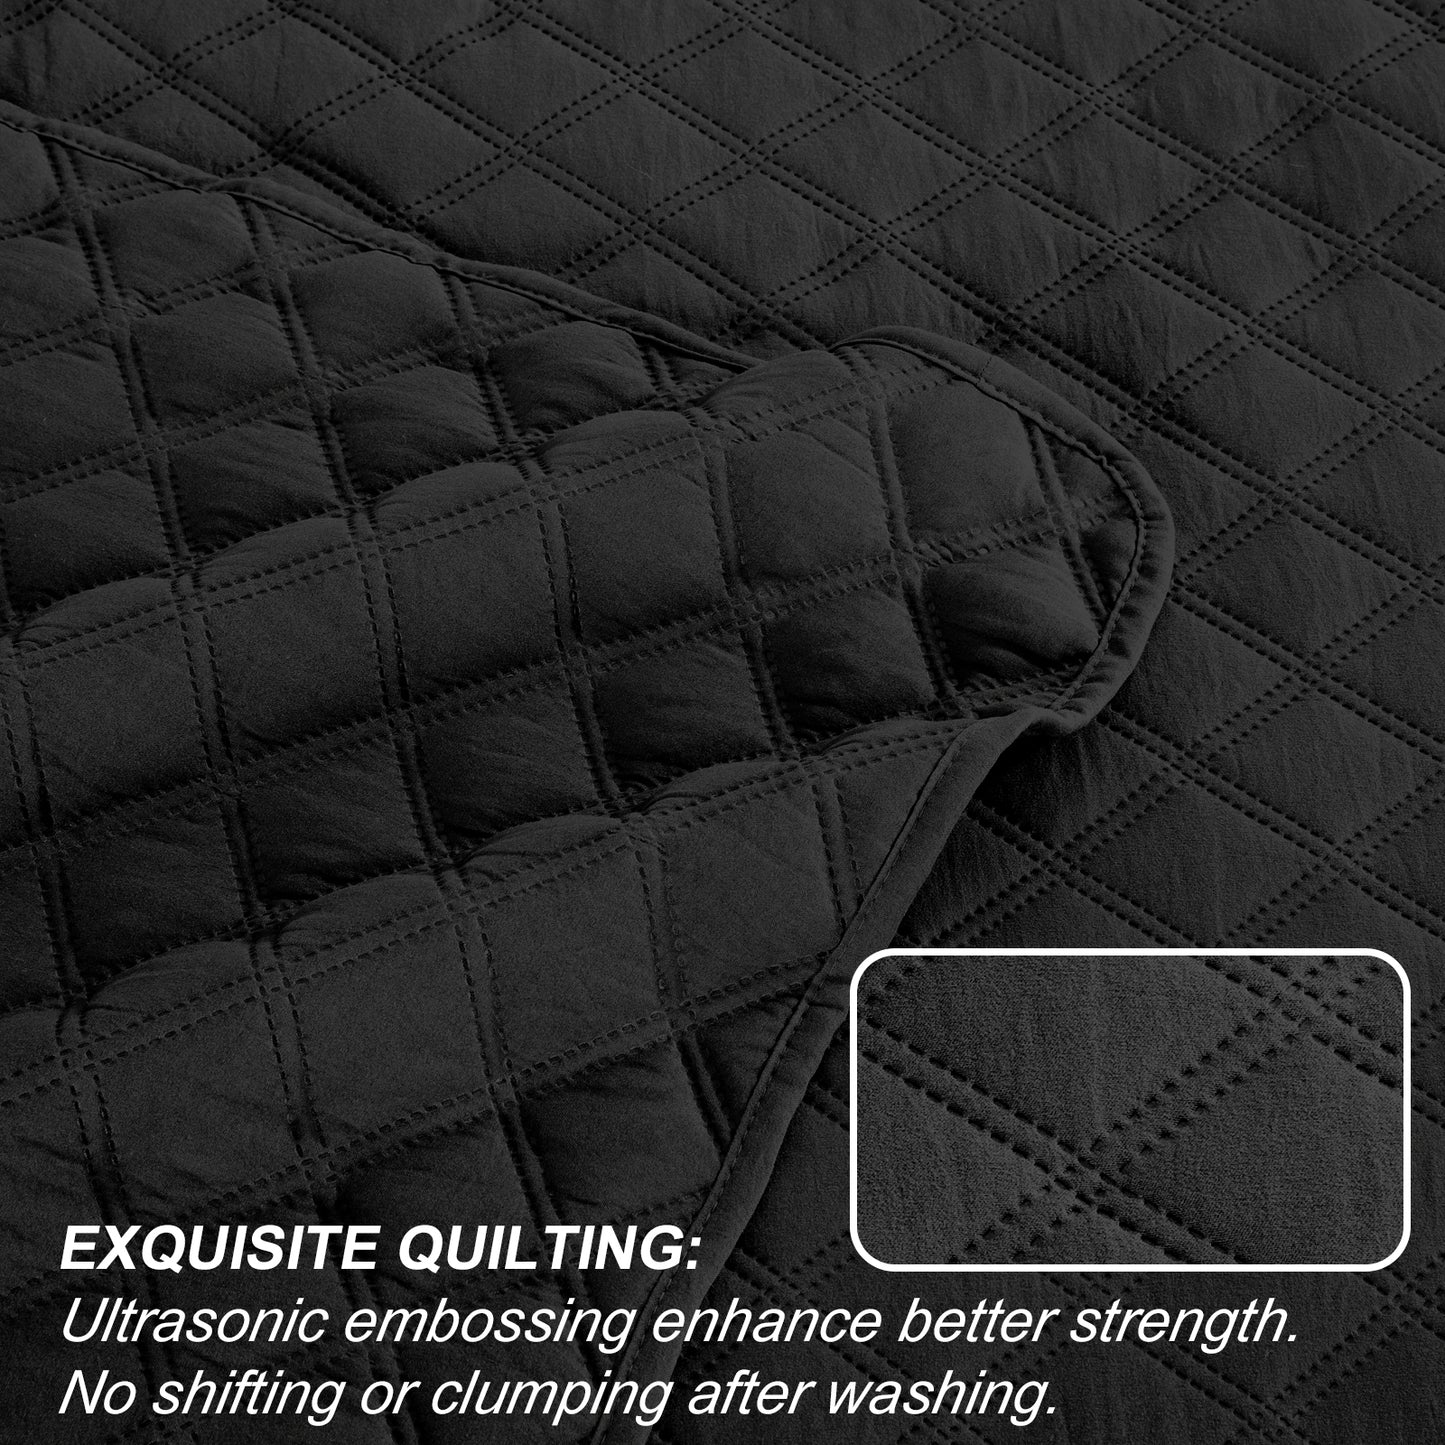 Exclusivo Mezcla 2-Piece Black Twin Size Quilt Set, Box Pattern Ultrasonic Lightweight and Soft Quilts/Bedspreads/Coverlets/Bedding Set (1 Quilt, 1 Pillow Sham) for All Seasons